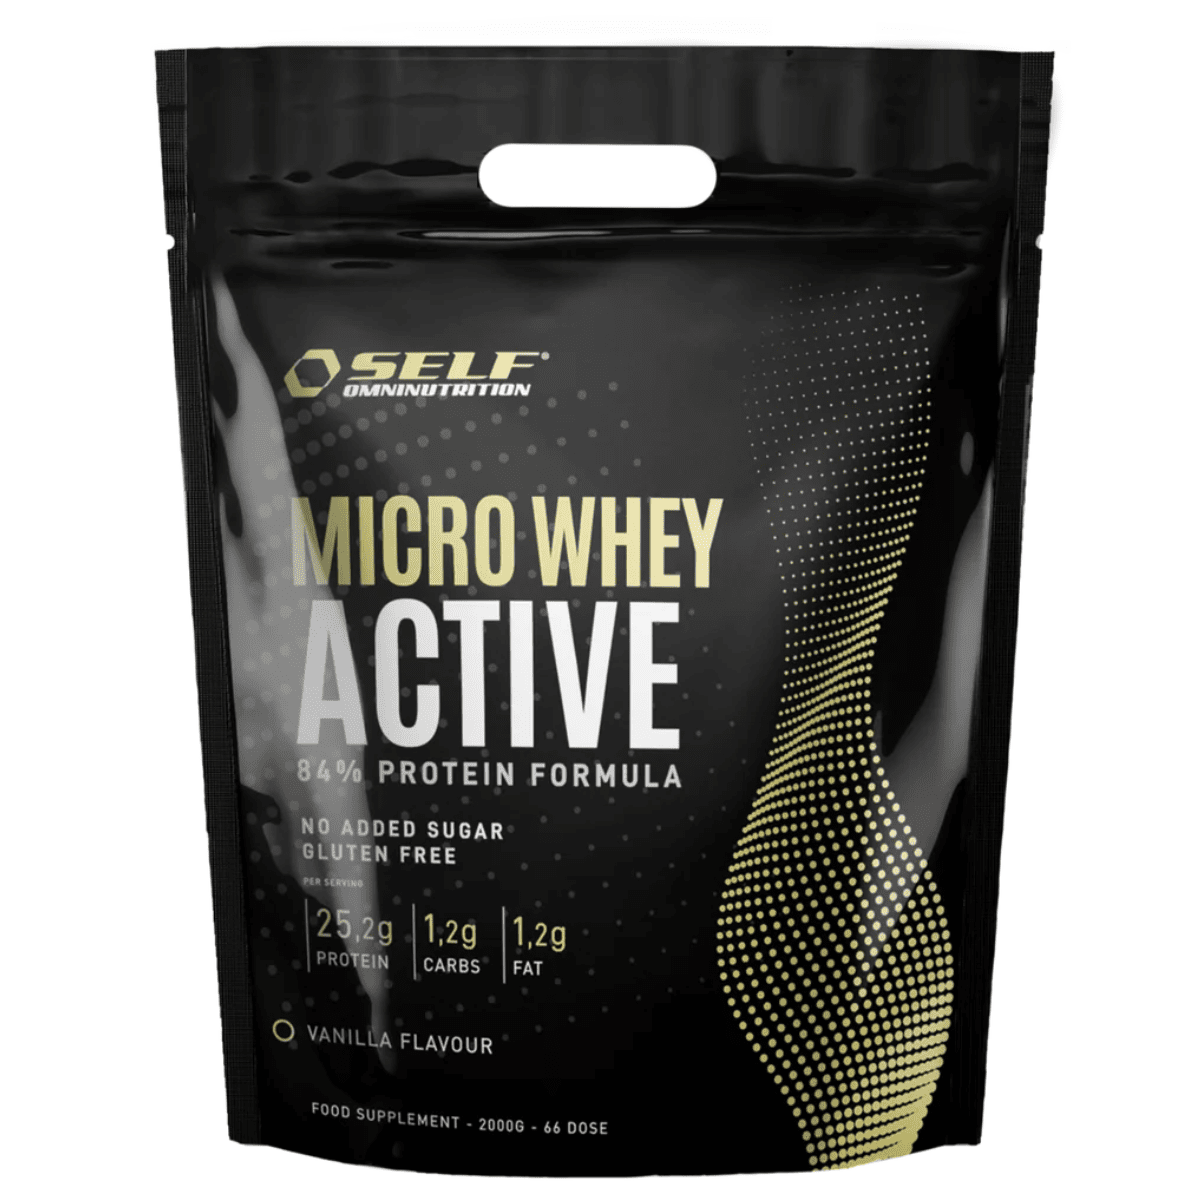 Self Omninutrition Micro Whey Active - 1